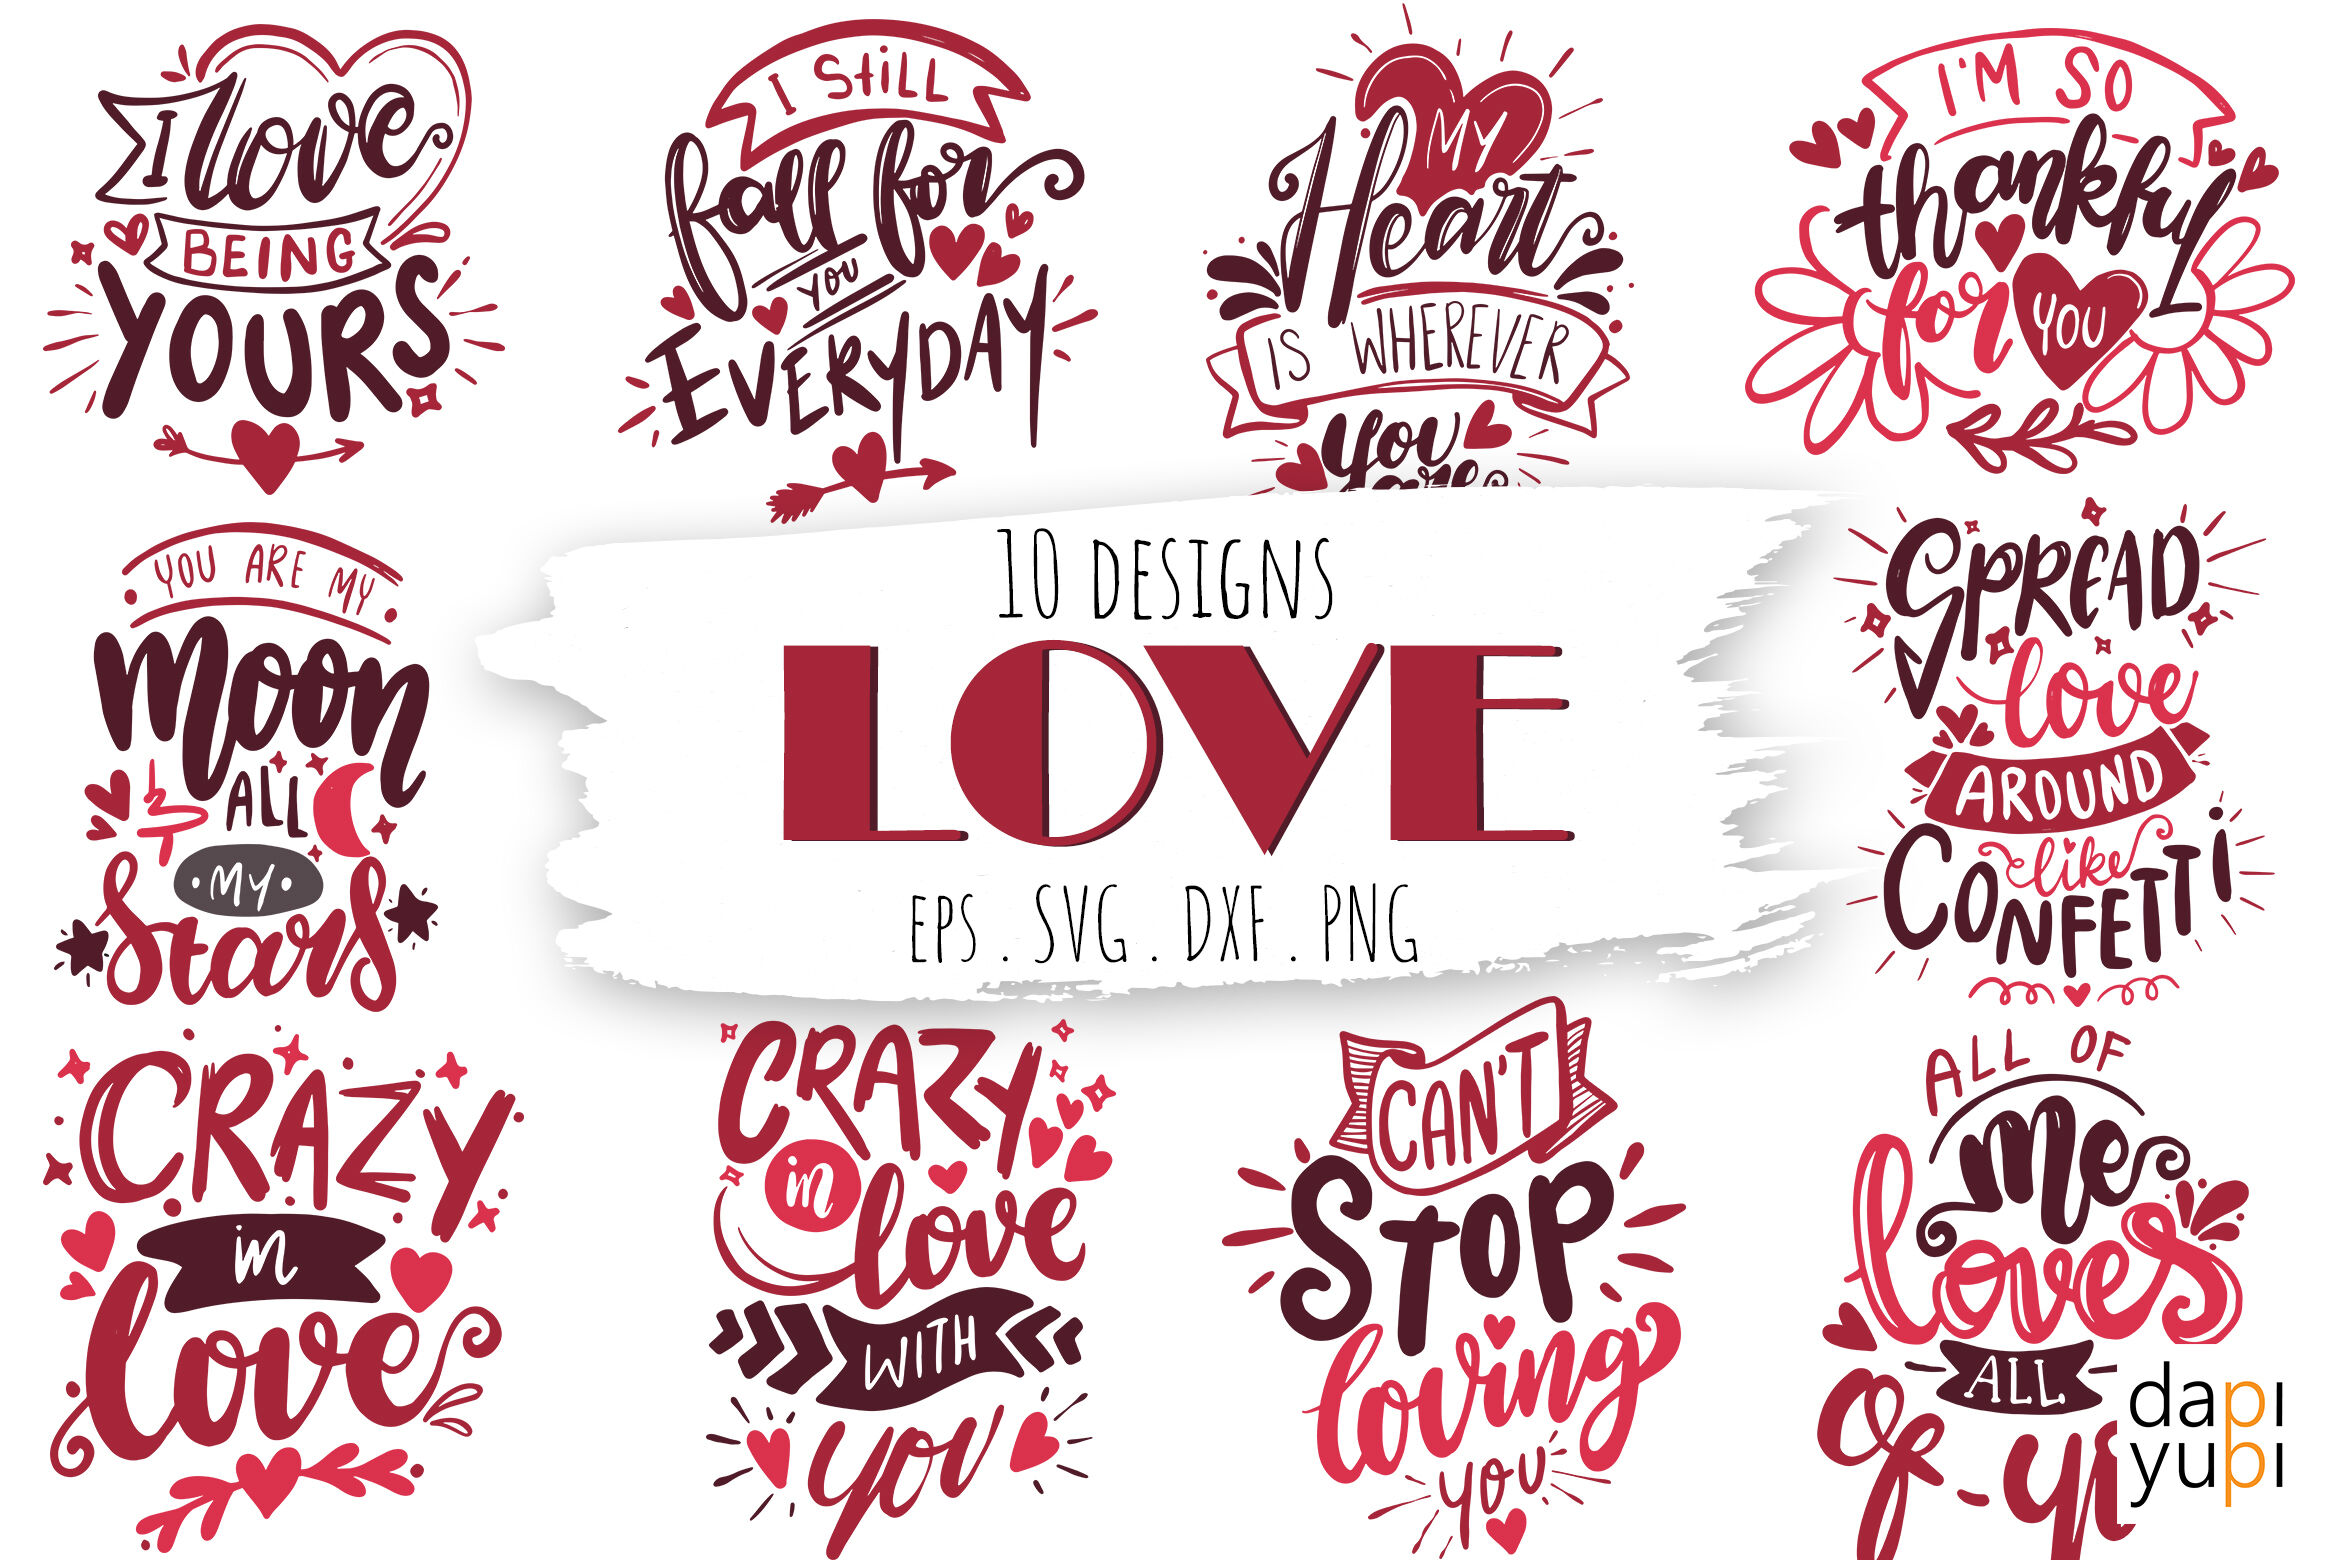 Red Heart Svg, Red Hand Drawn Heart Svg, Valentine's Day Svg, Love Svg. Cut  File Cricut, Png Pdf Eps, Vector, Stencil, Decal, Sticker. -  Sweden